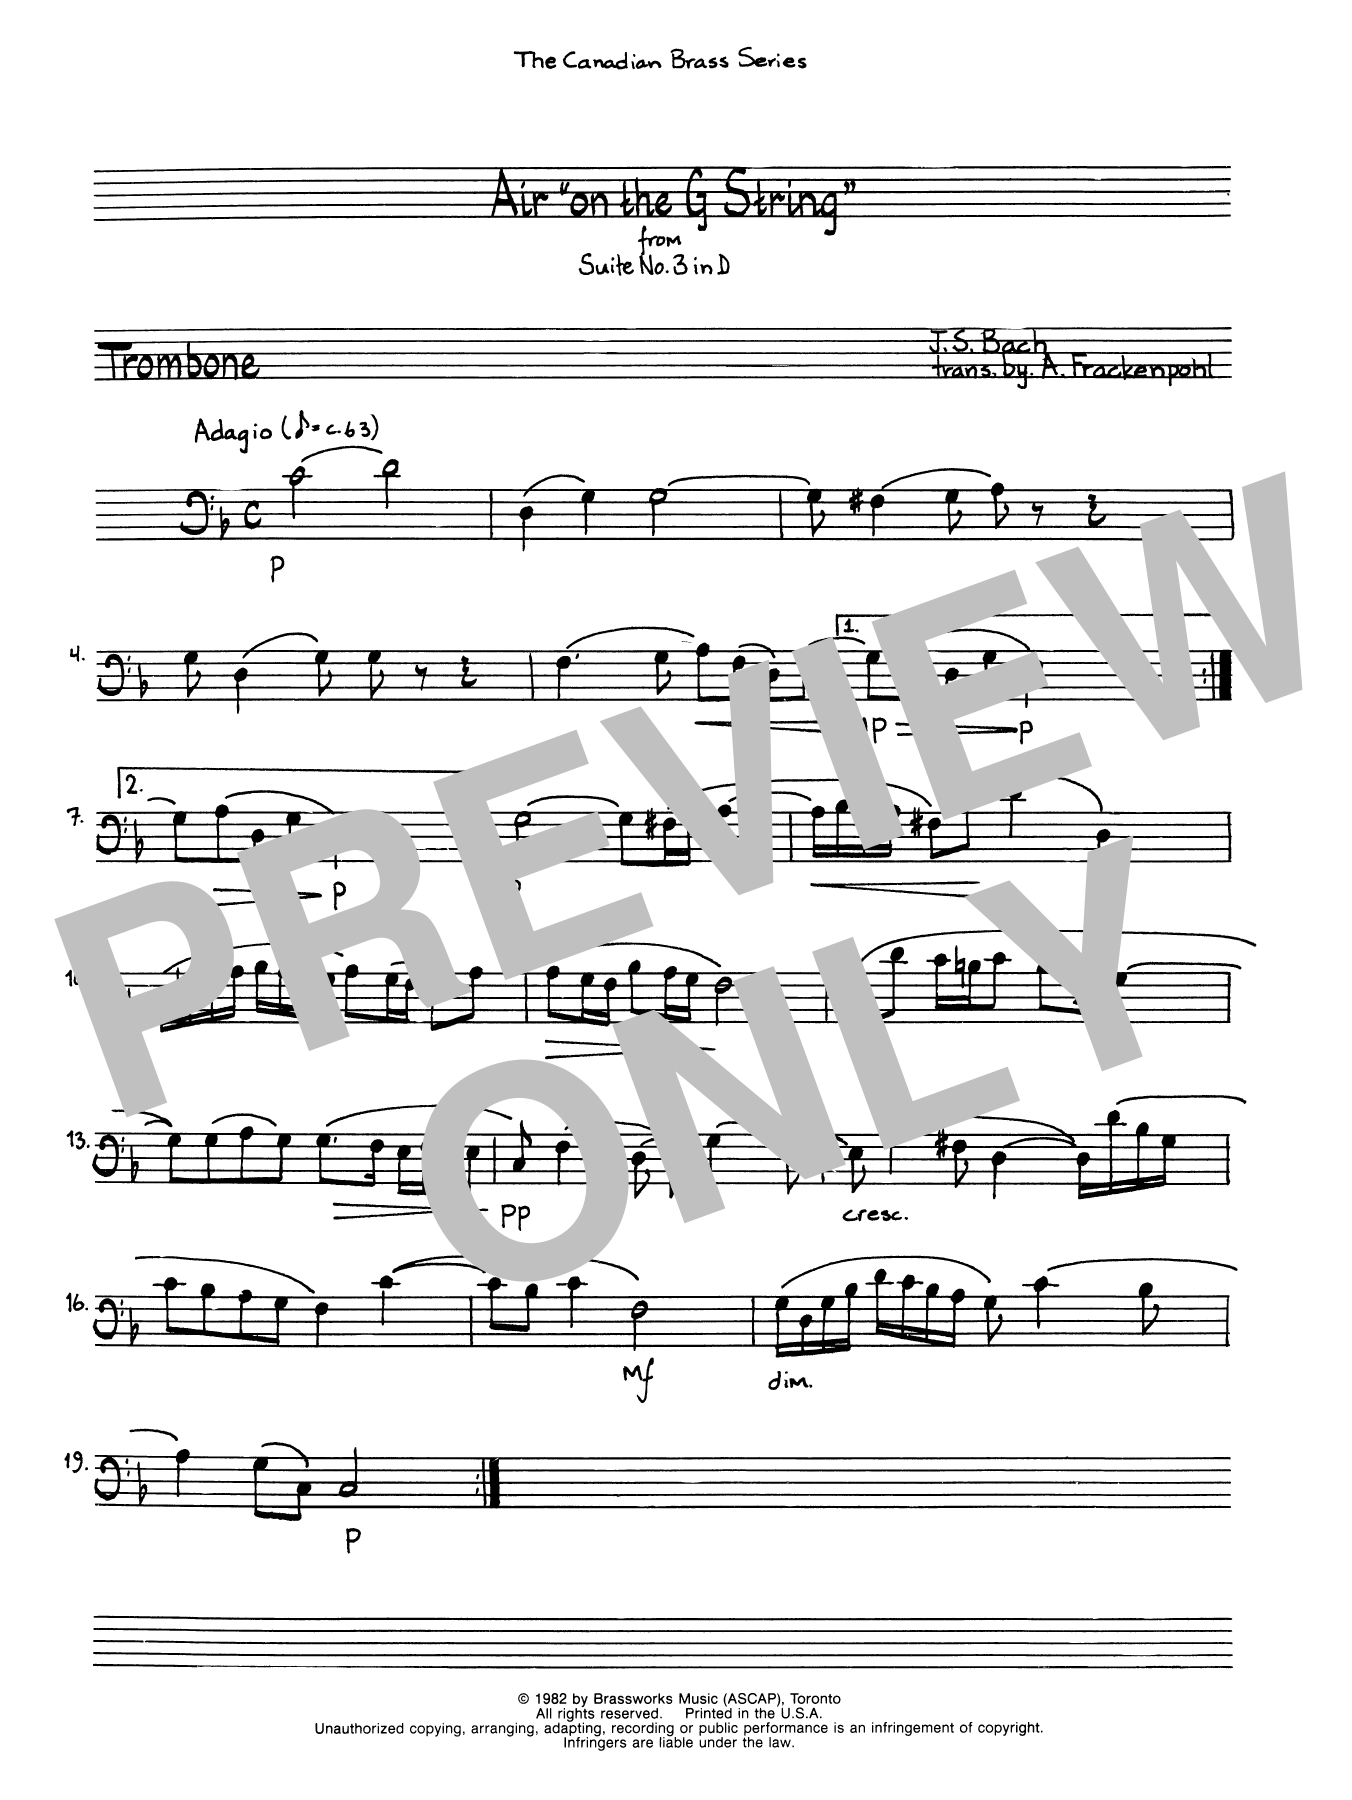 A. Frackenpohl Air On The G String - Trombone (B.C.) sheet music notes and chords. Download Printable PDF.